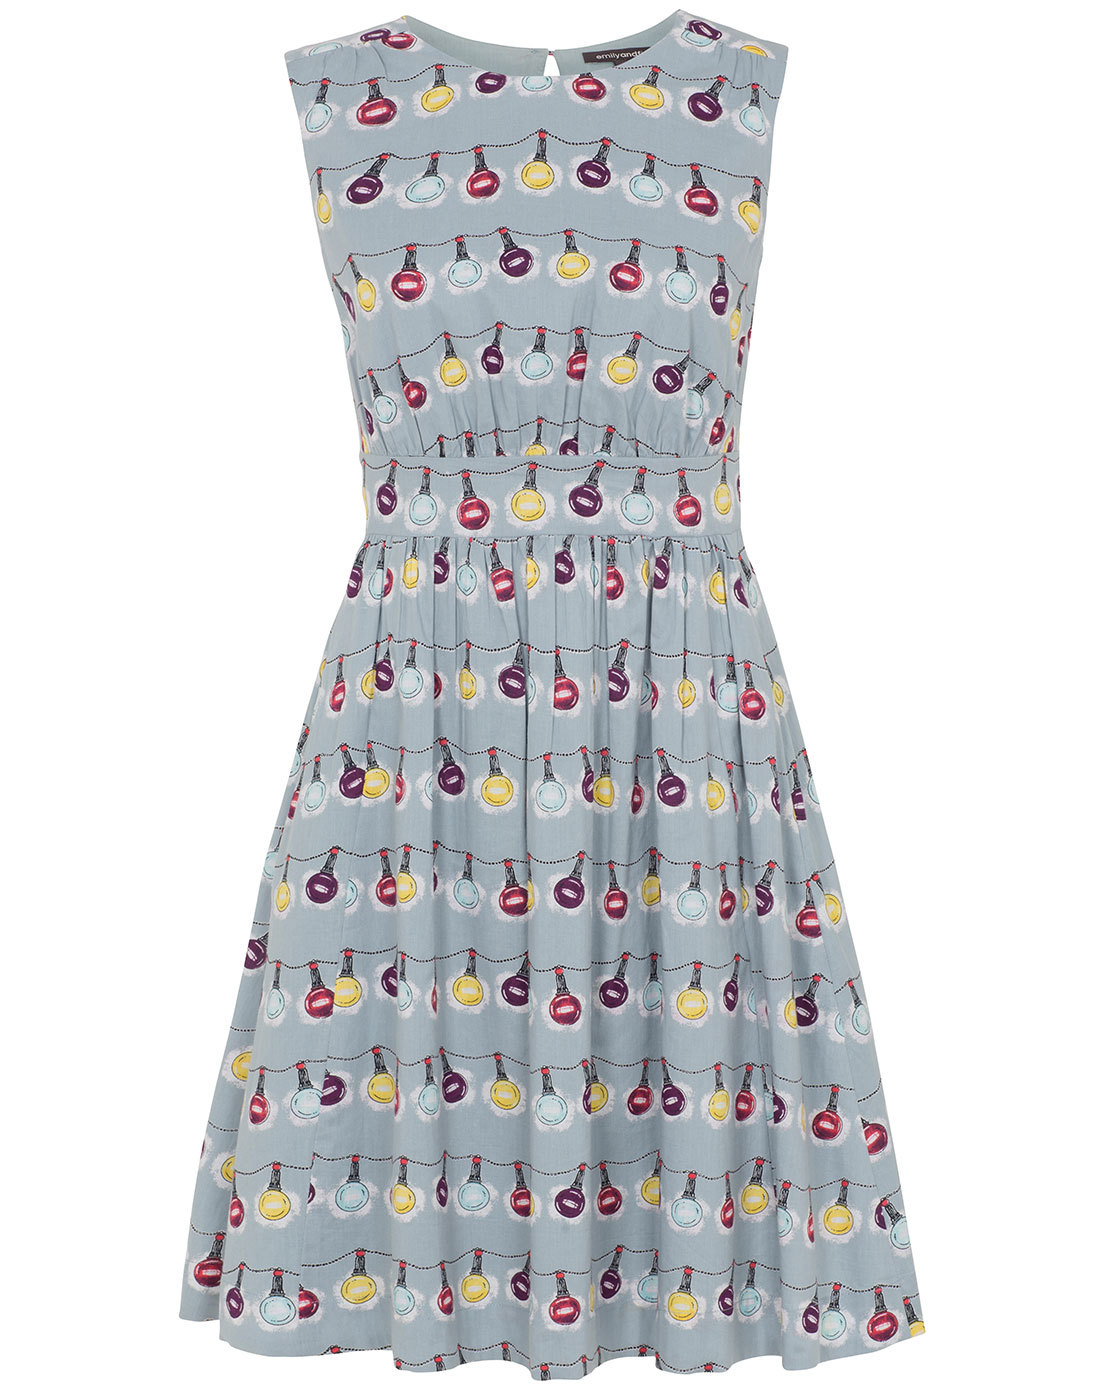 Lucy EMILY AND FIN Retro 50s Vintage Lights Dress